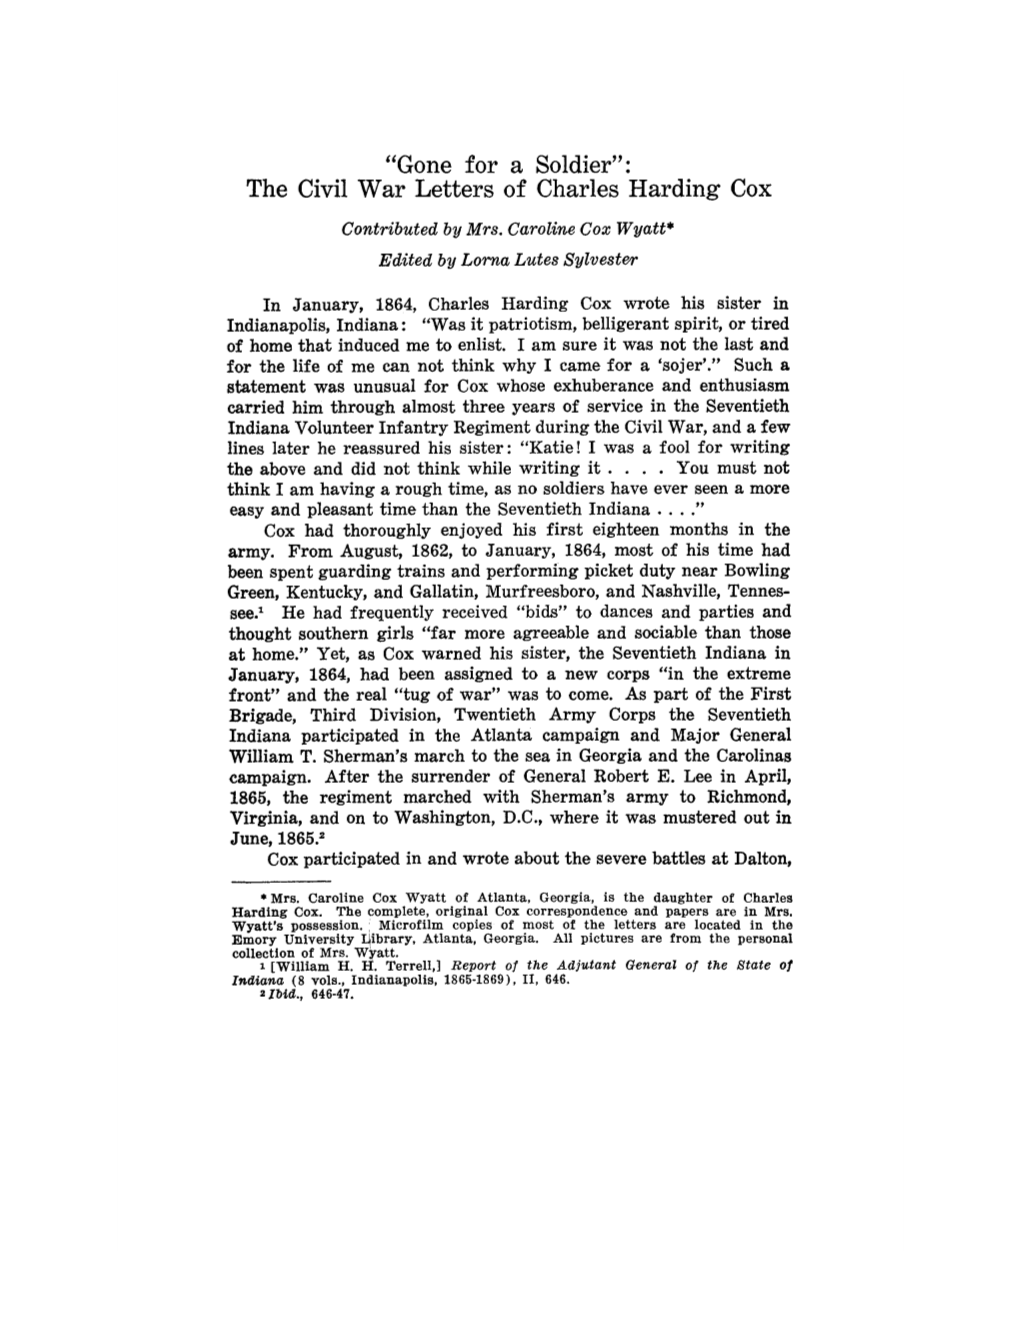 “Gone for a Soldier”: the Civil War Letters of Charles Harding Cox Contributed by Mrs